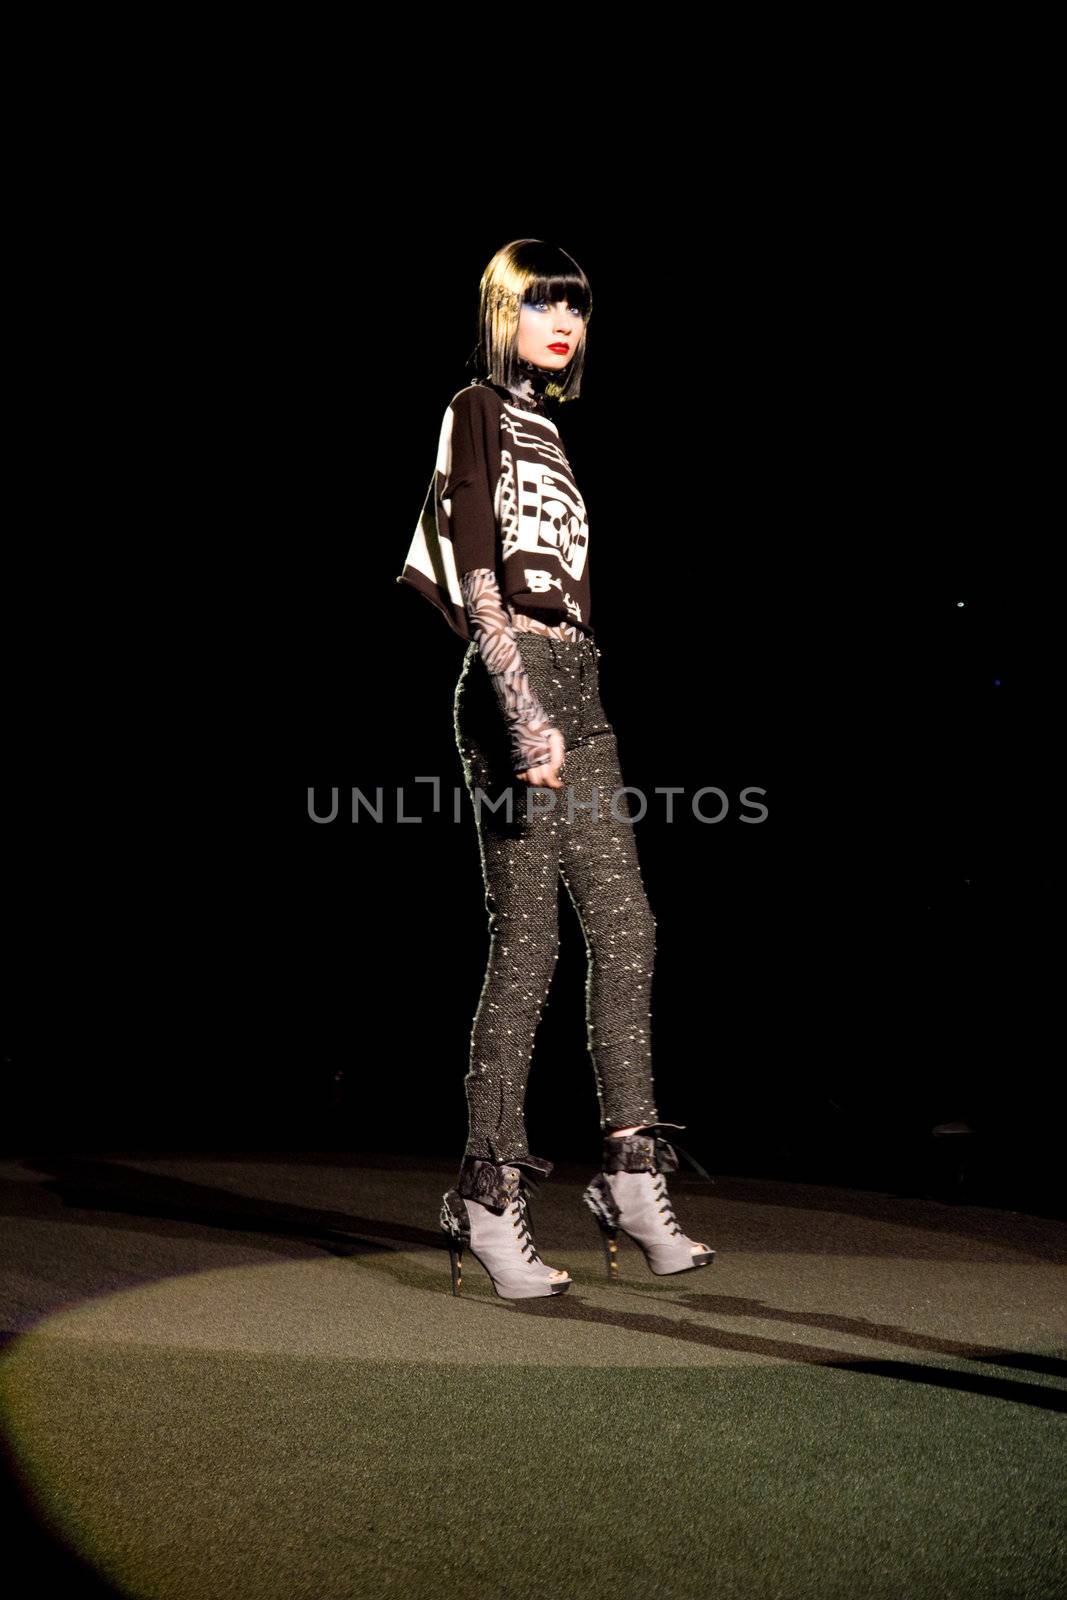 NEW YORK, NY - FEBRUARY 14: A model walks the runway at the Betsey Johnson Fall 2011 fashion show during Mercedes-Benz Fashion Week at The Theatre at Lincoln Center on February 14, 2011 in New York City. (Photo by Diana Beato)